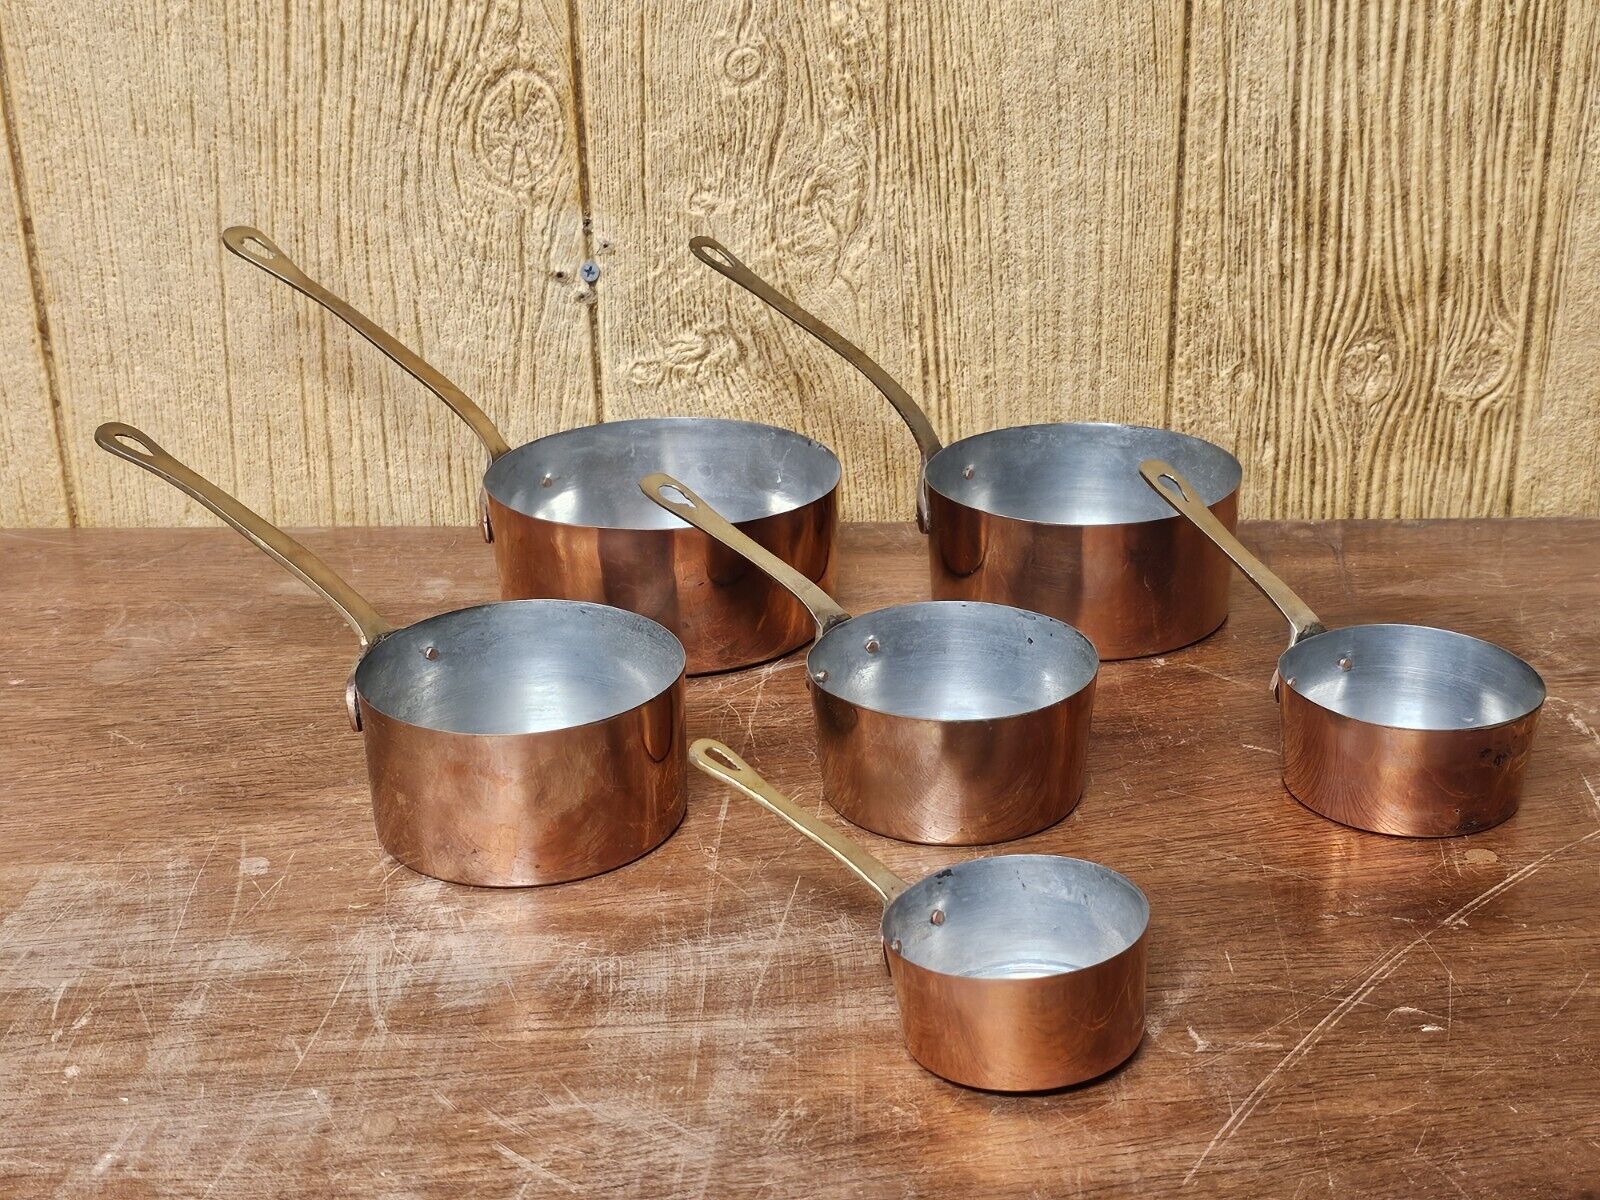 Vtg 6 Piece Copper Measuring Cups Cooking Nesting Pots On Tin W Brass Handles